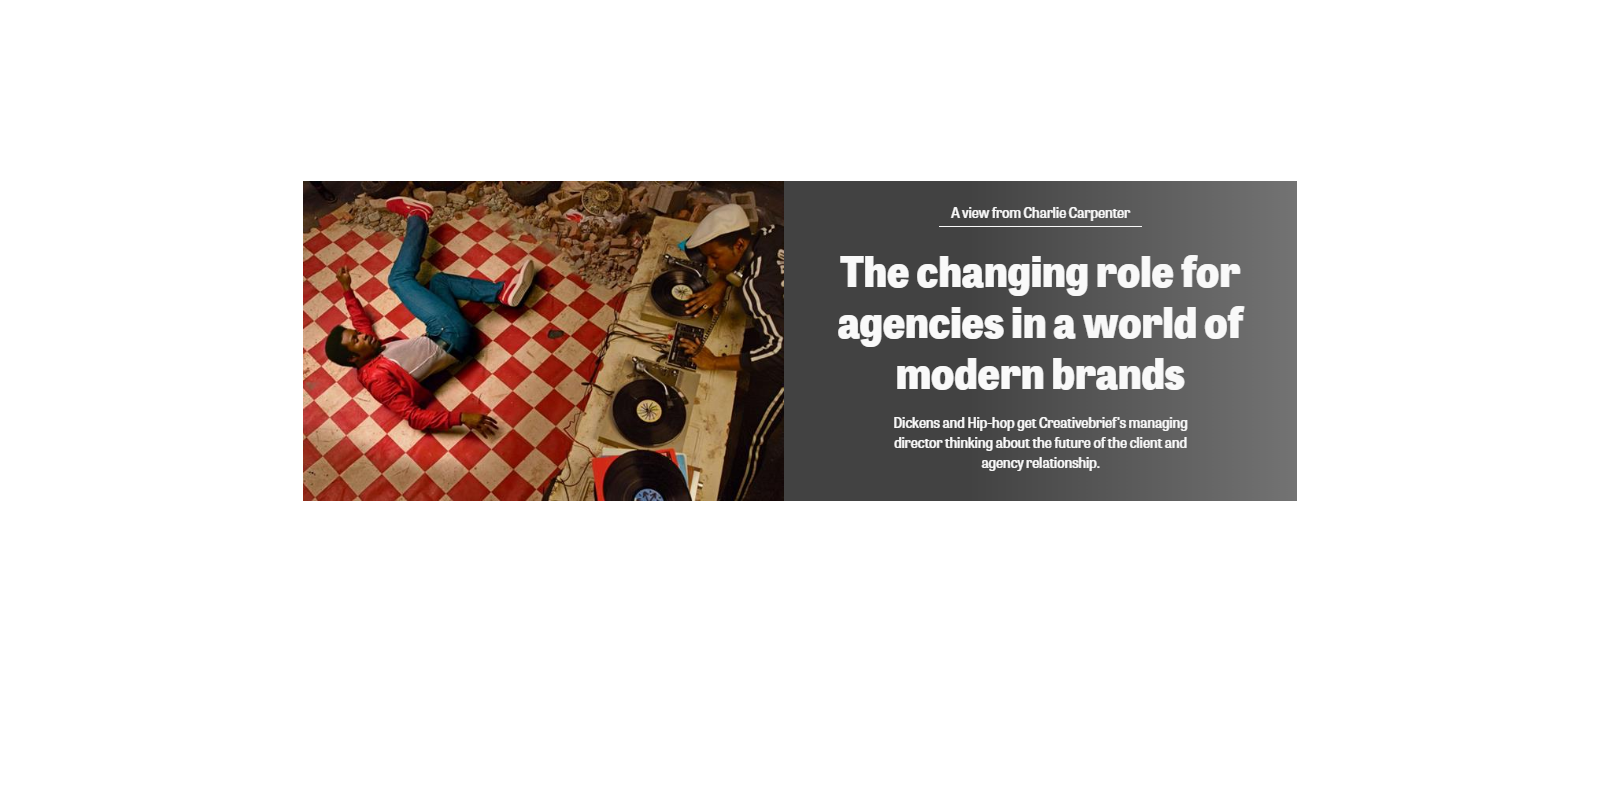 charlie-changing-role-for-agencies-article-campaign.png